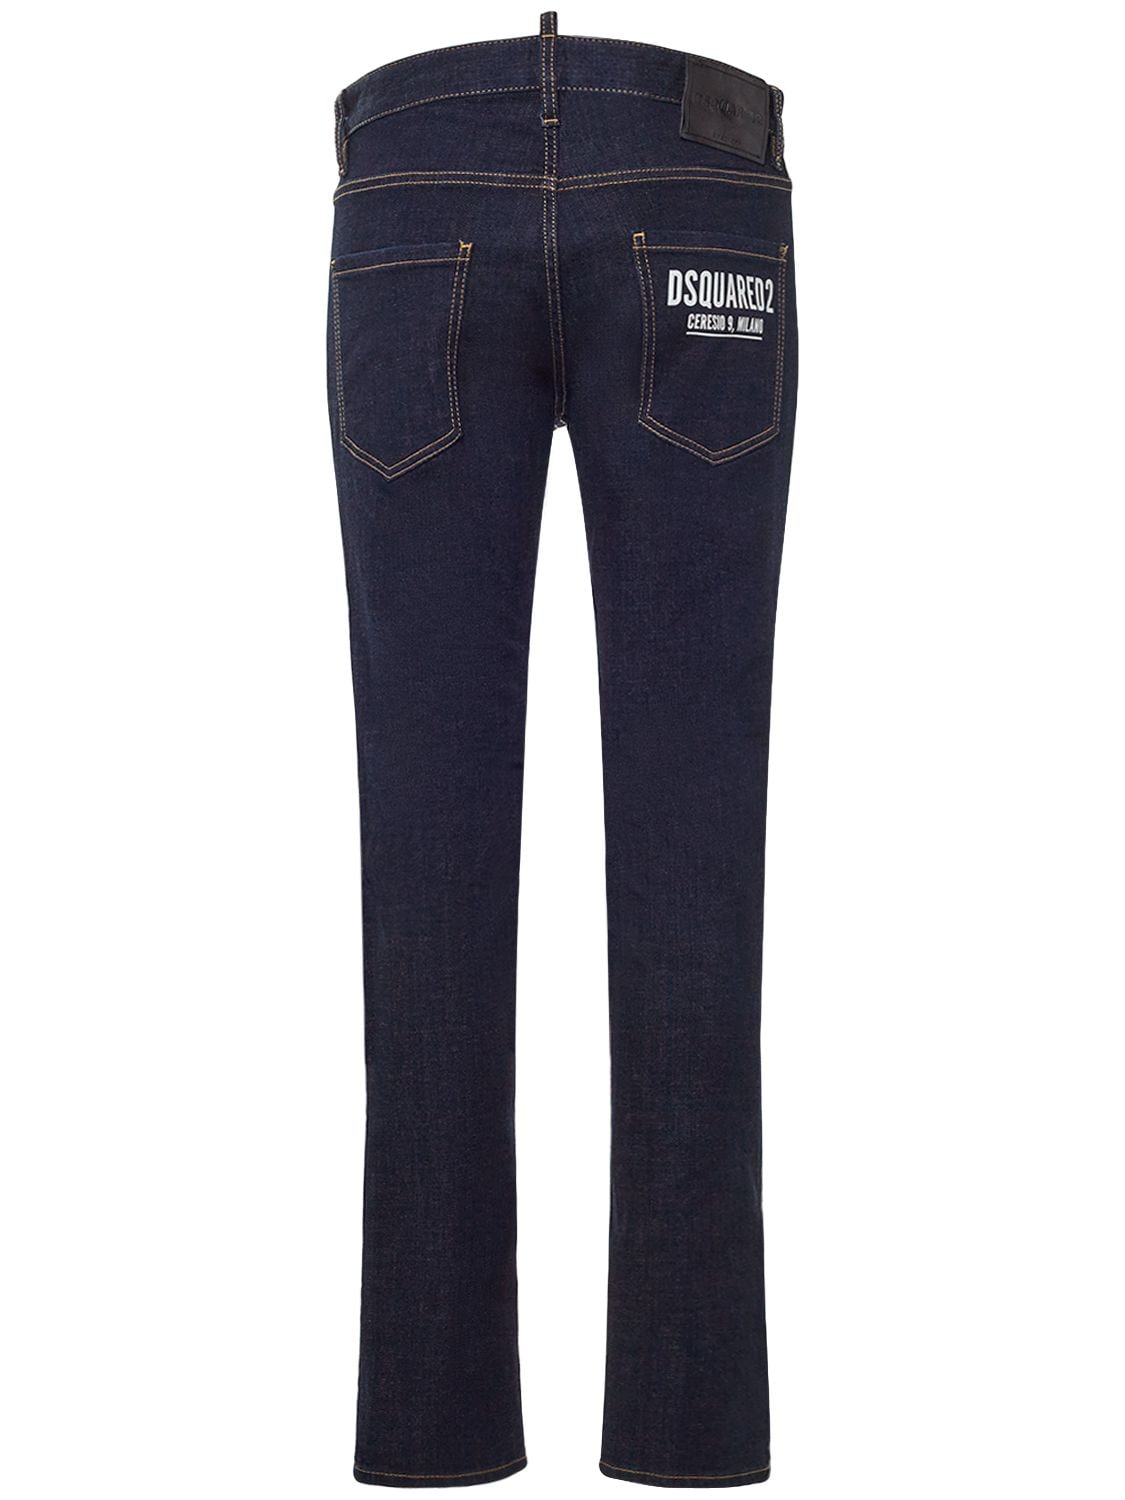 Image of Ceresio 9 Cool Guy Cotton Denim Jeans